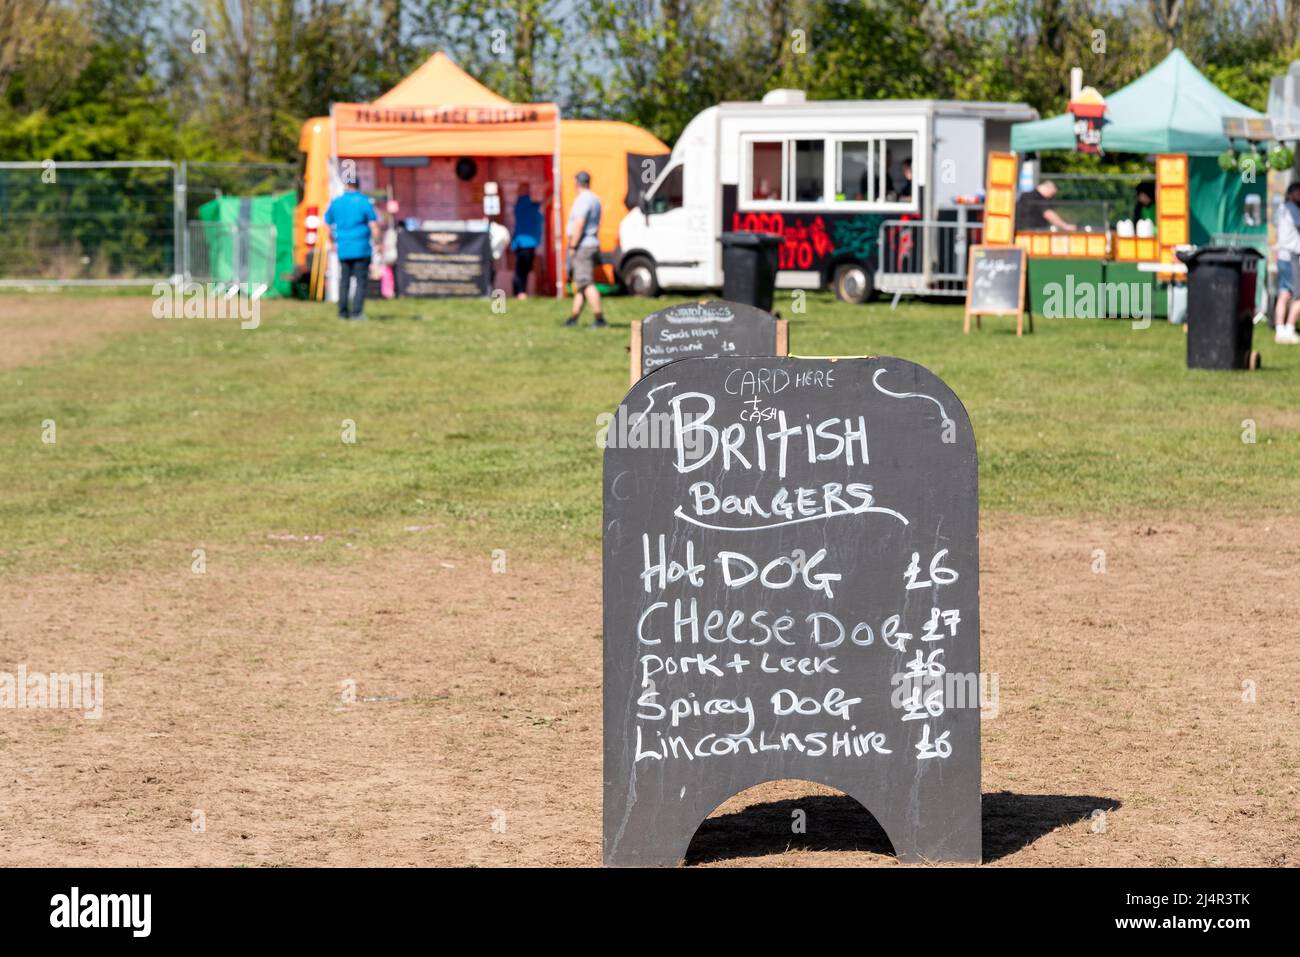 Food vendors at an outside event ready for customers. Prices on blackboard for British burgers, hot dog, cheese dog, pork, spicy dog, sausages Stock Photo